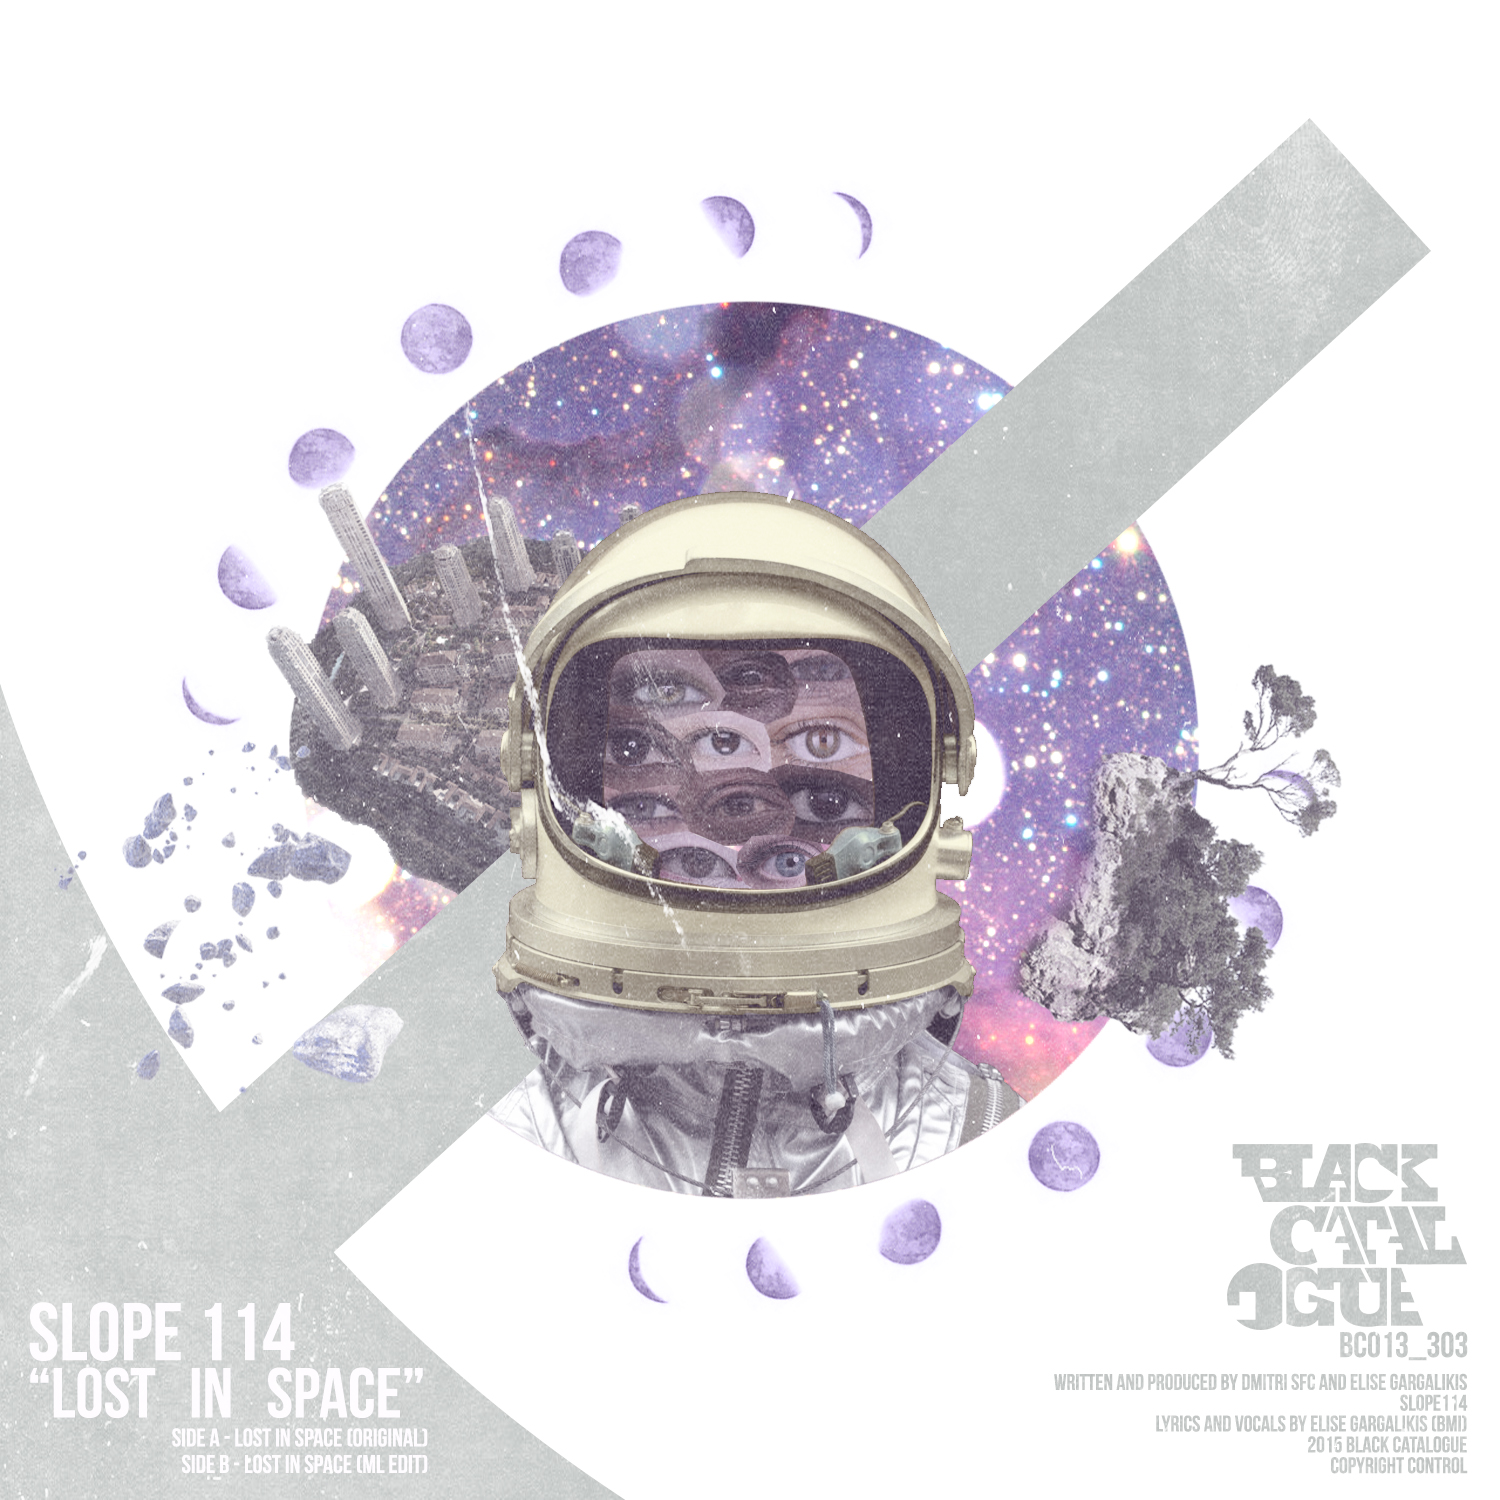 Slope 114/LOST IN SPACE 12"